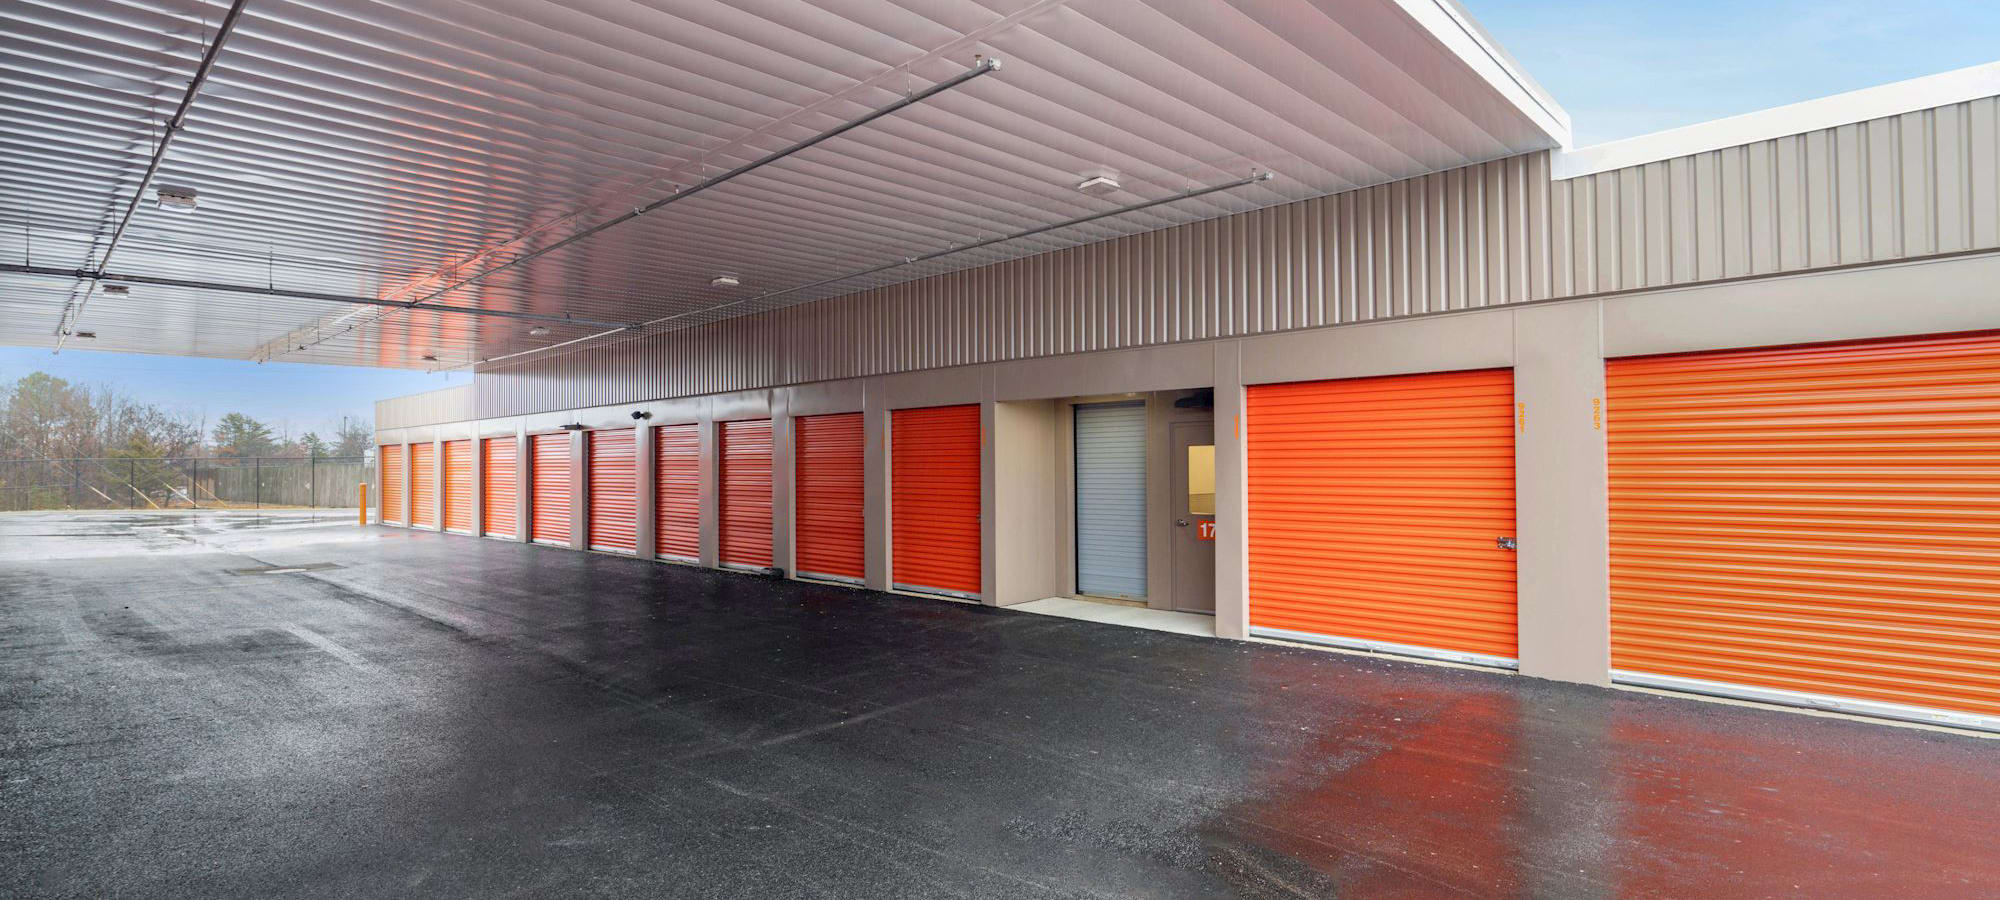 Exterior storage units at YourSpace Storage @ St. Charles in Waldorf, Maryland